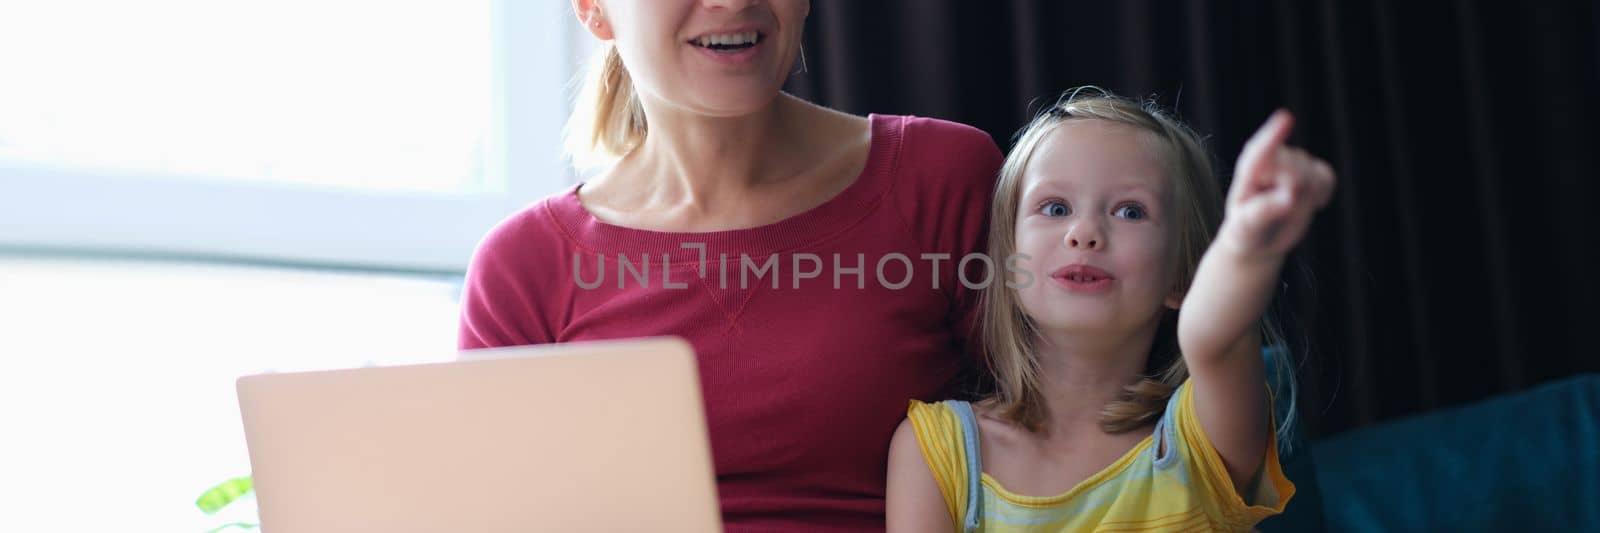 Portrait of mother and child sitting on sofa with laptop looking away in surprise. Emotions of surprise and delight